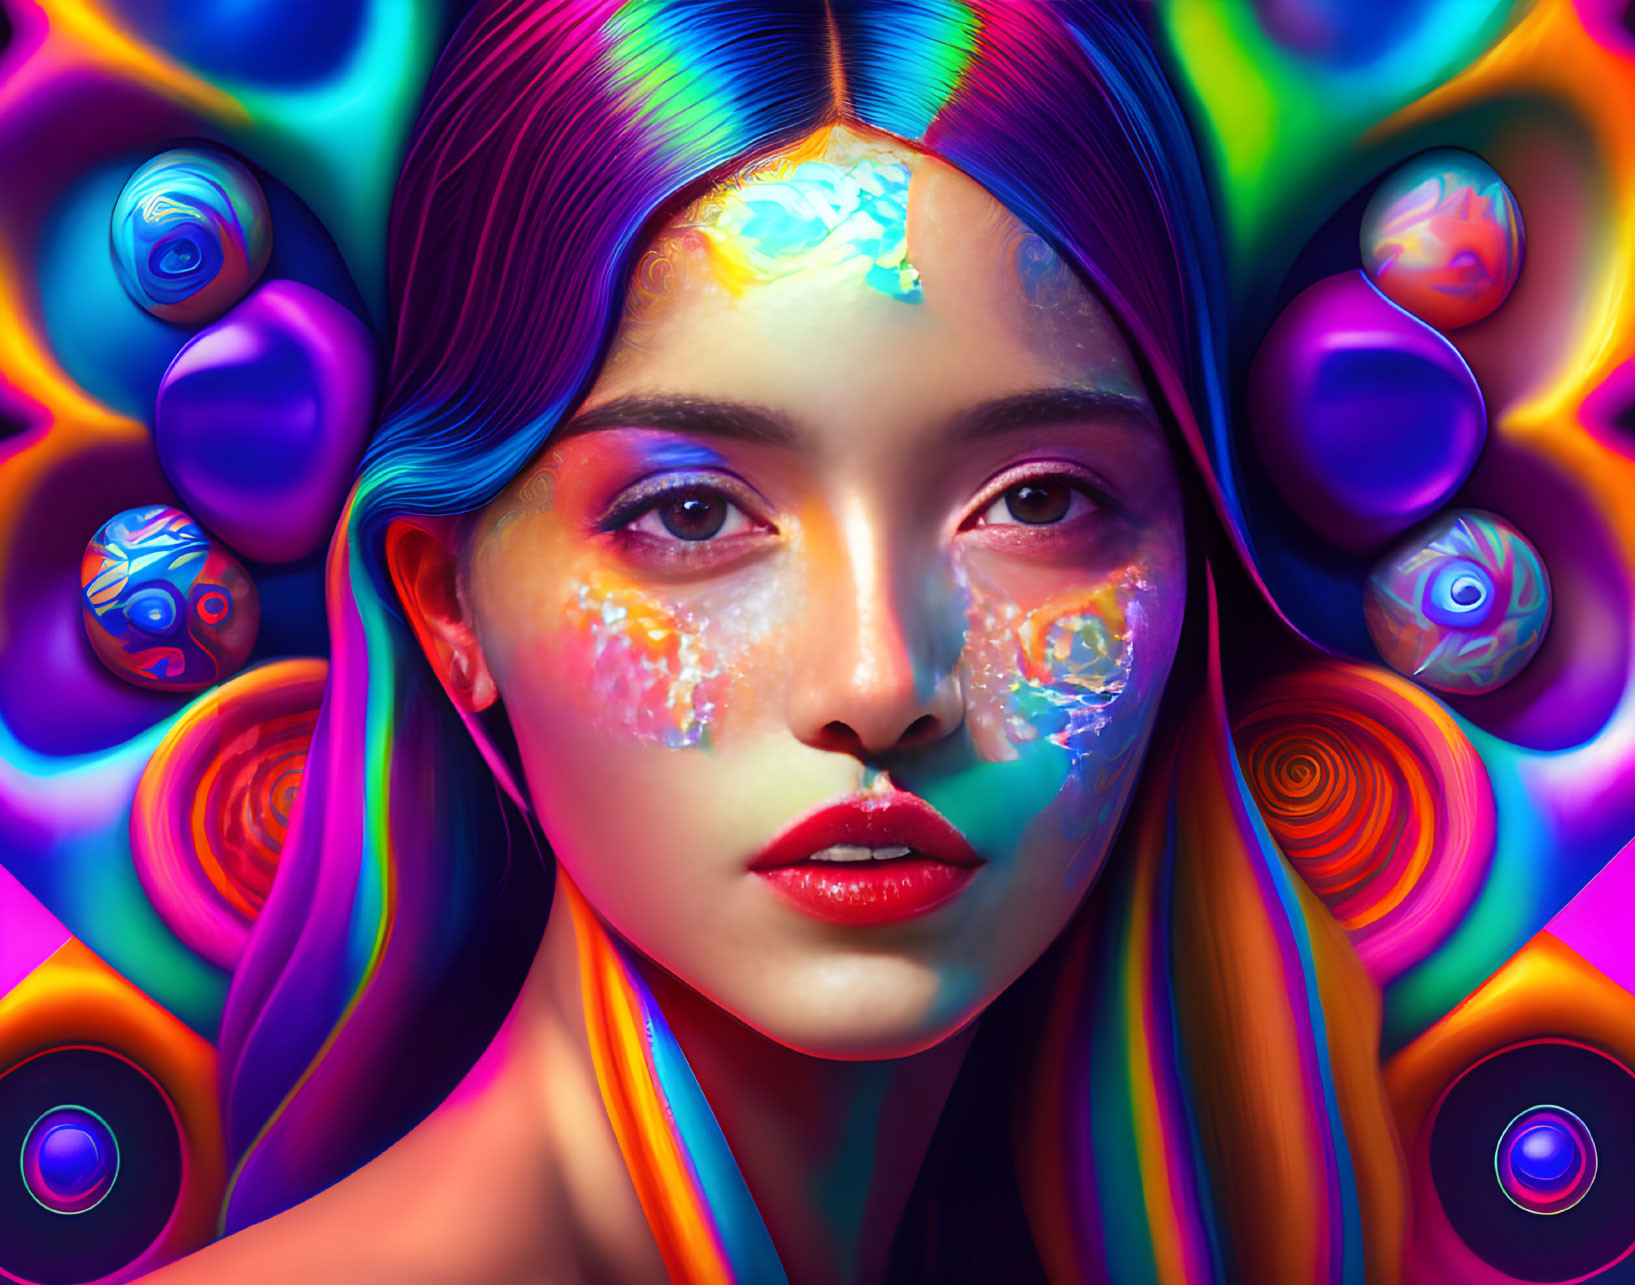 Colorful digital artwork of woman with multicolored skin in abstract circular patterns